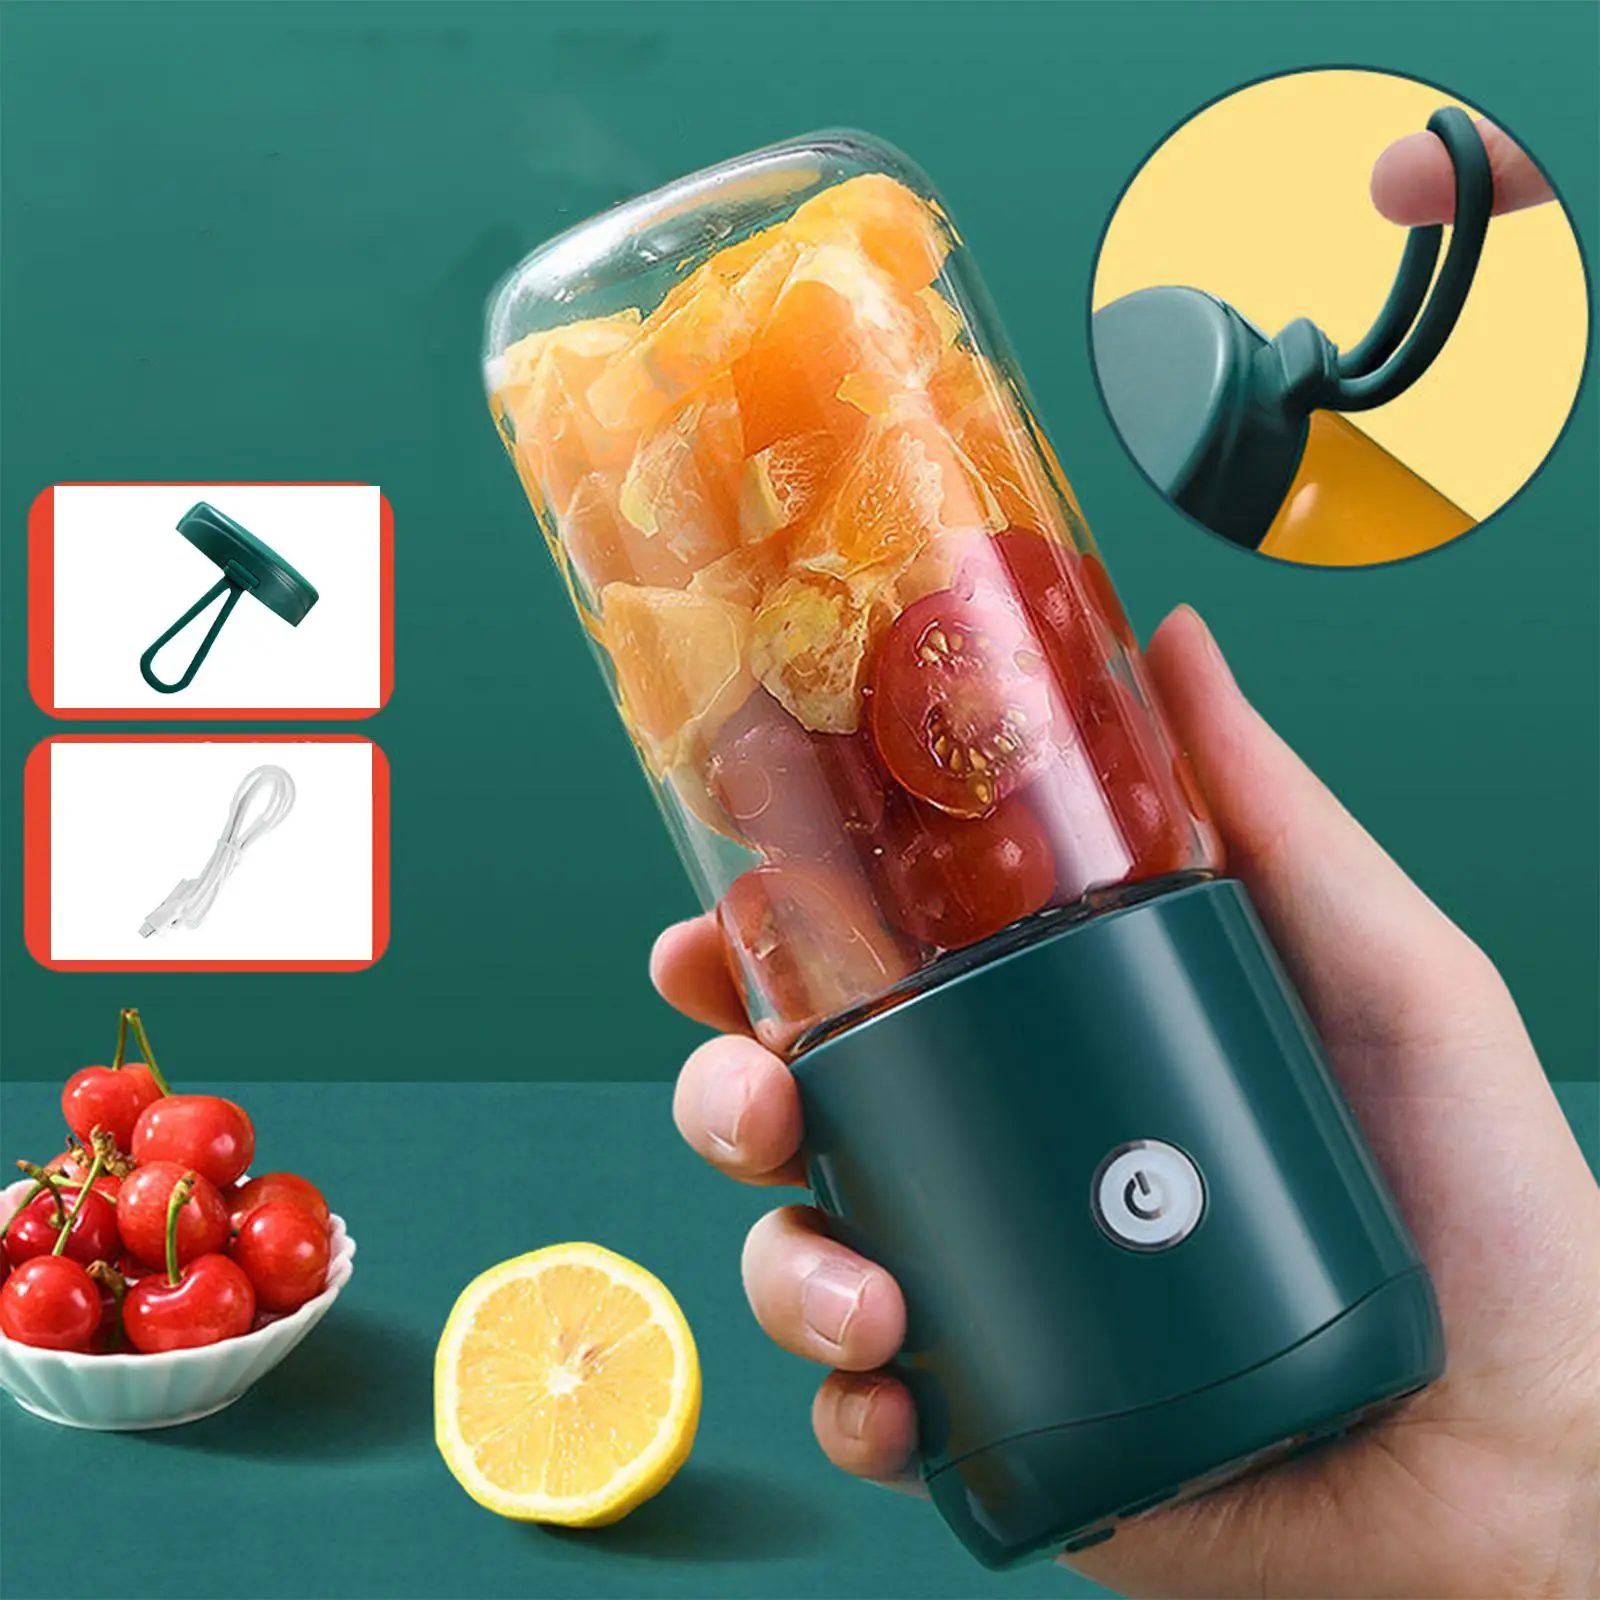 Portable Electric Juicer Cup Extractor USB Charging Food Processor Machine 380ml Stainless Steel Orange Juicer Mixer